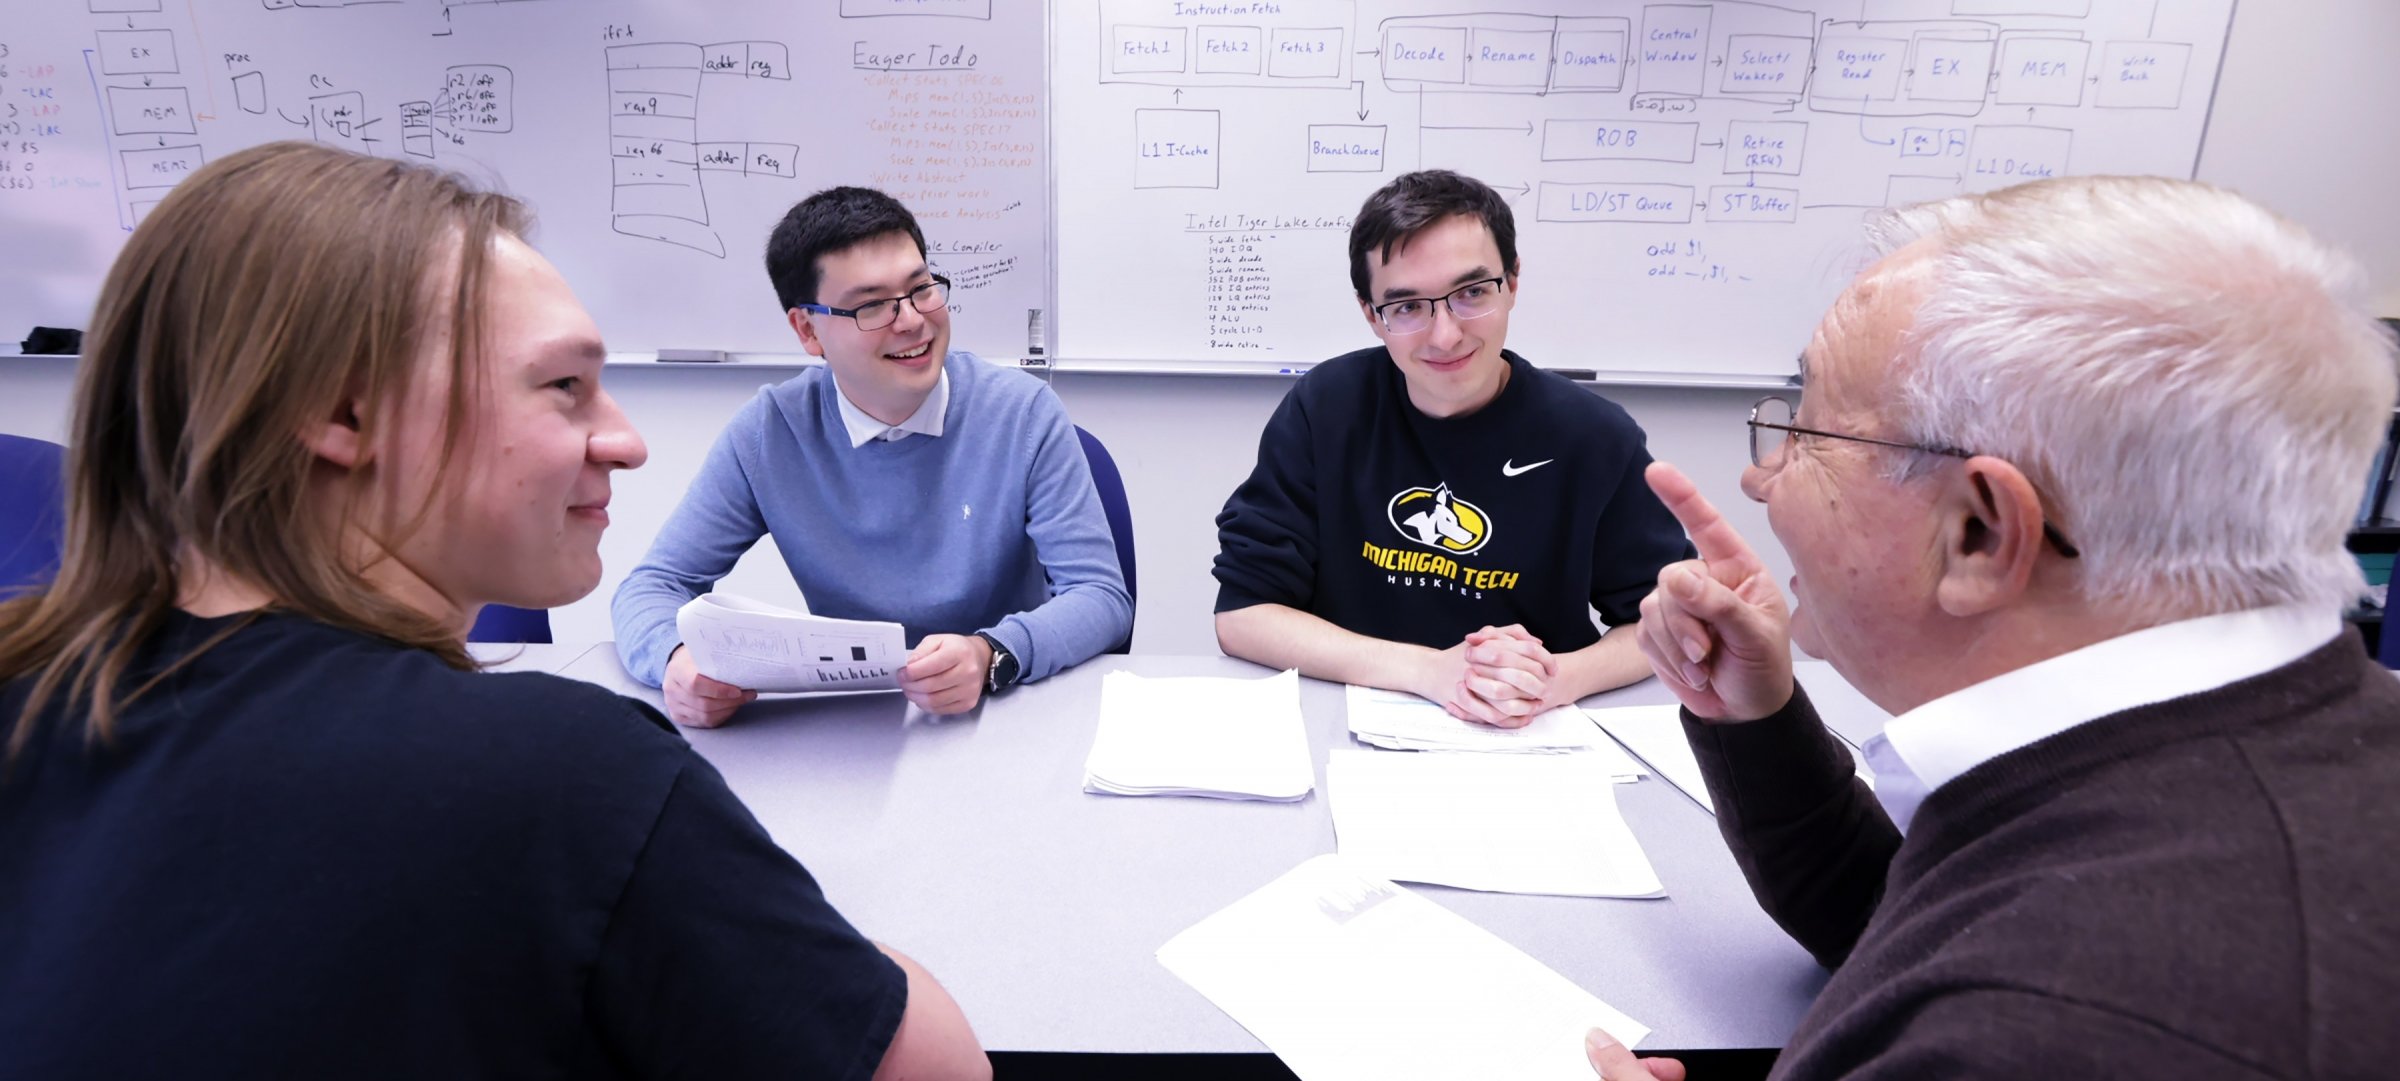 Computing professor and students discuss their work